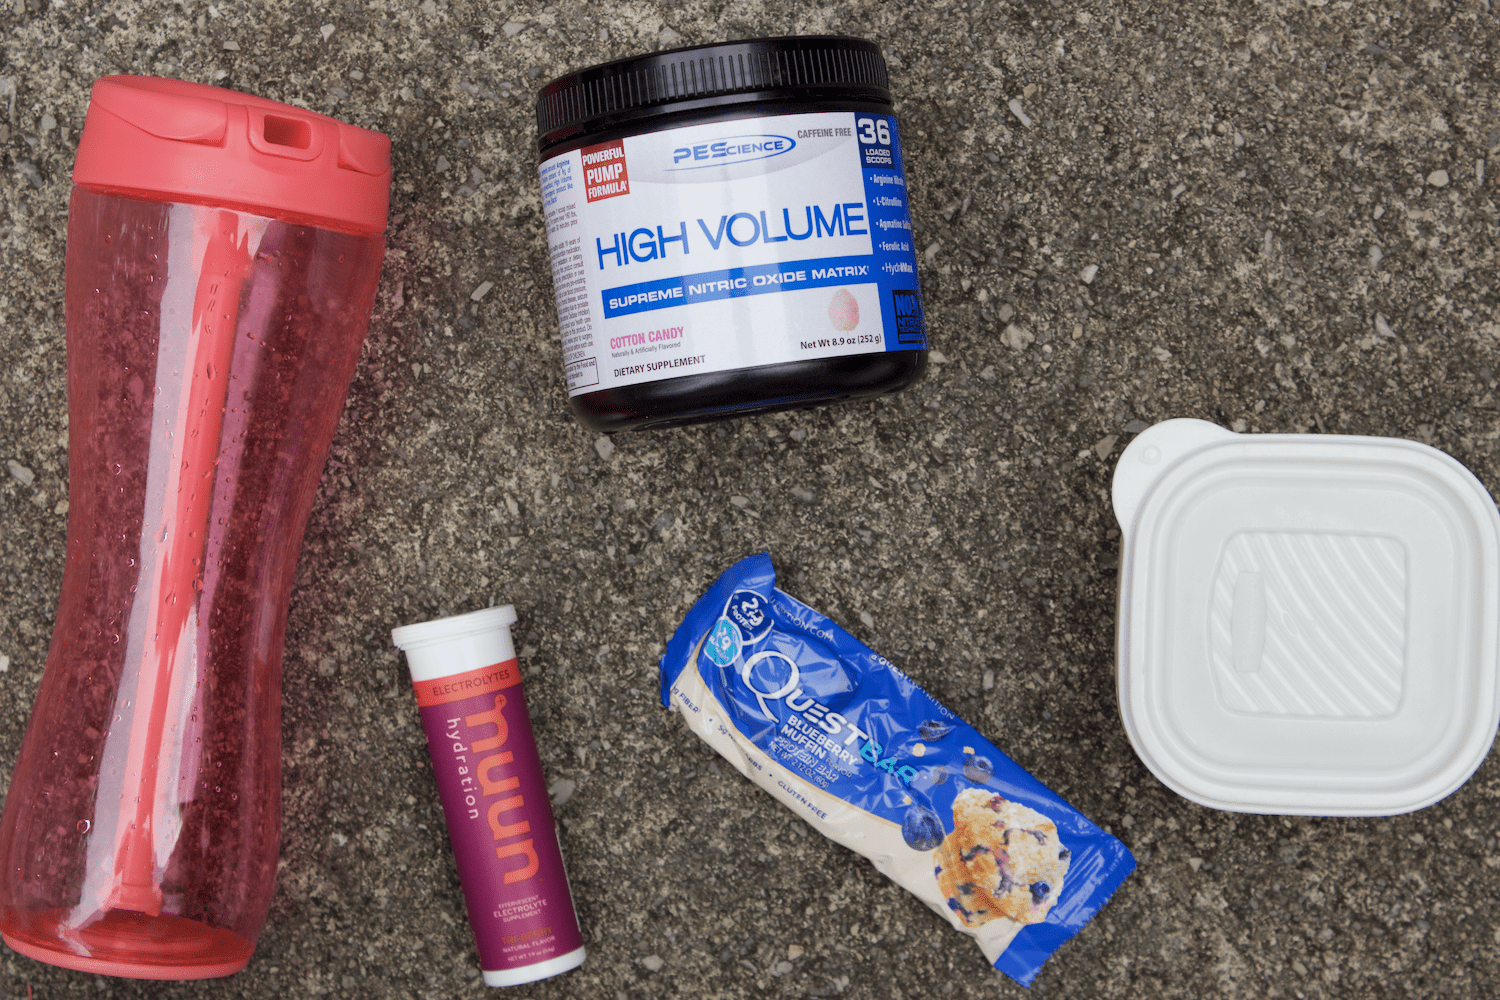 Get the most out of your workout by having everything you need in your gym bag. Here's what I keep in my gym bag to have the best workouts!